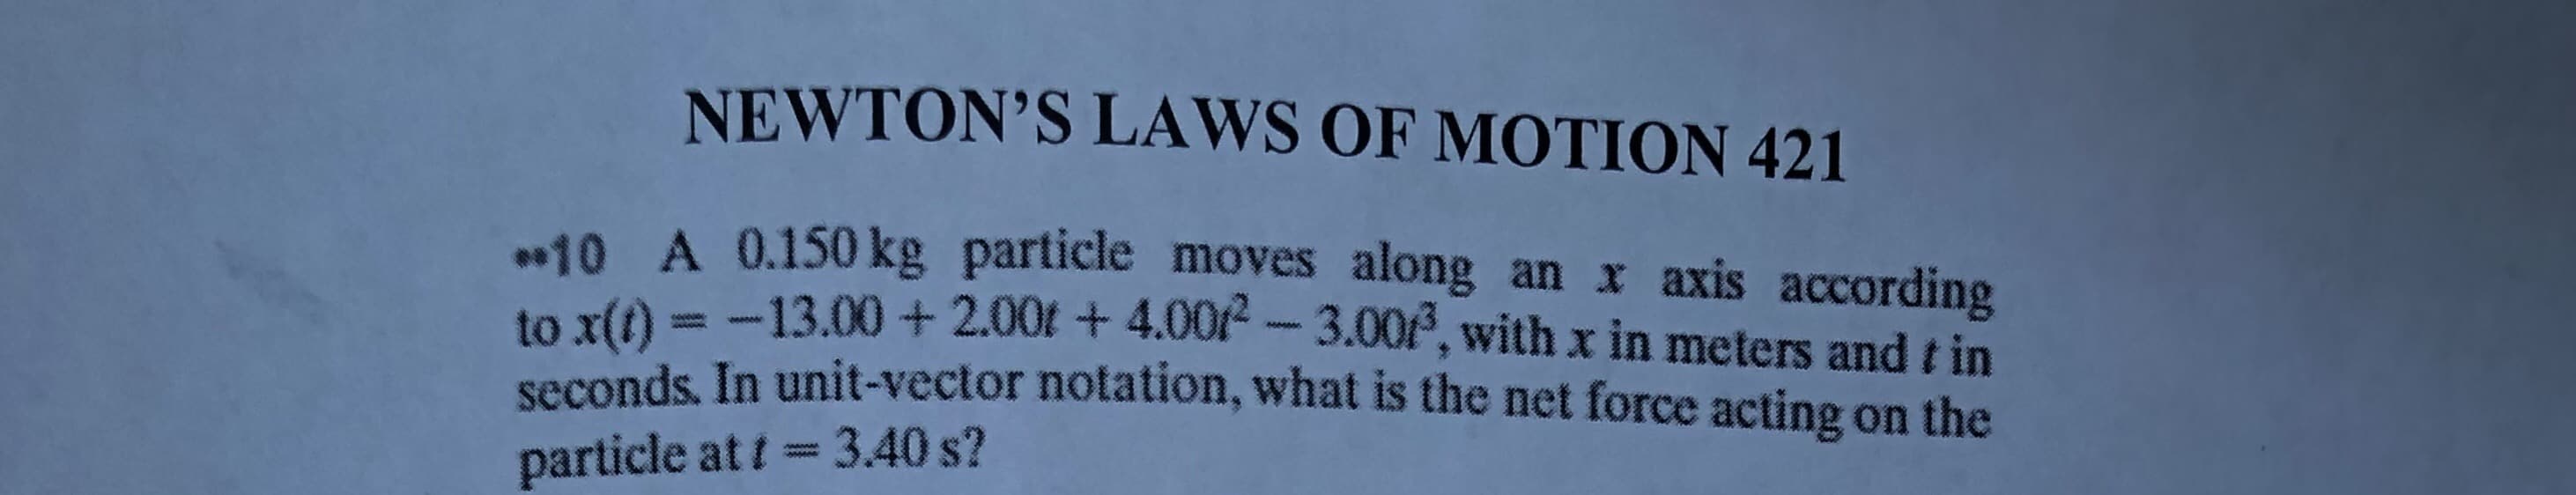 NEWTON'S LAWS OF MOTION 421
.10 A 0.150 kg particle moves along an x axis according
to x(t) = -13.00 + 2.00t + 4.00/- 3.00, with x in meters and t in
seconds. In unit-vector notation, what is the net force acting on the
particle at t= 3.40 s?
